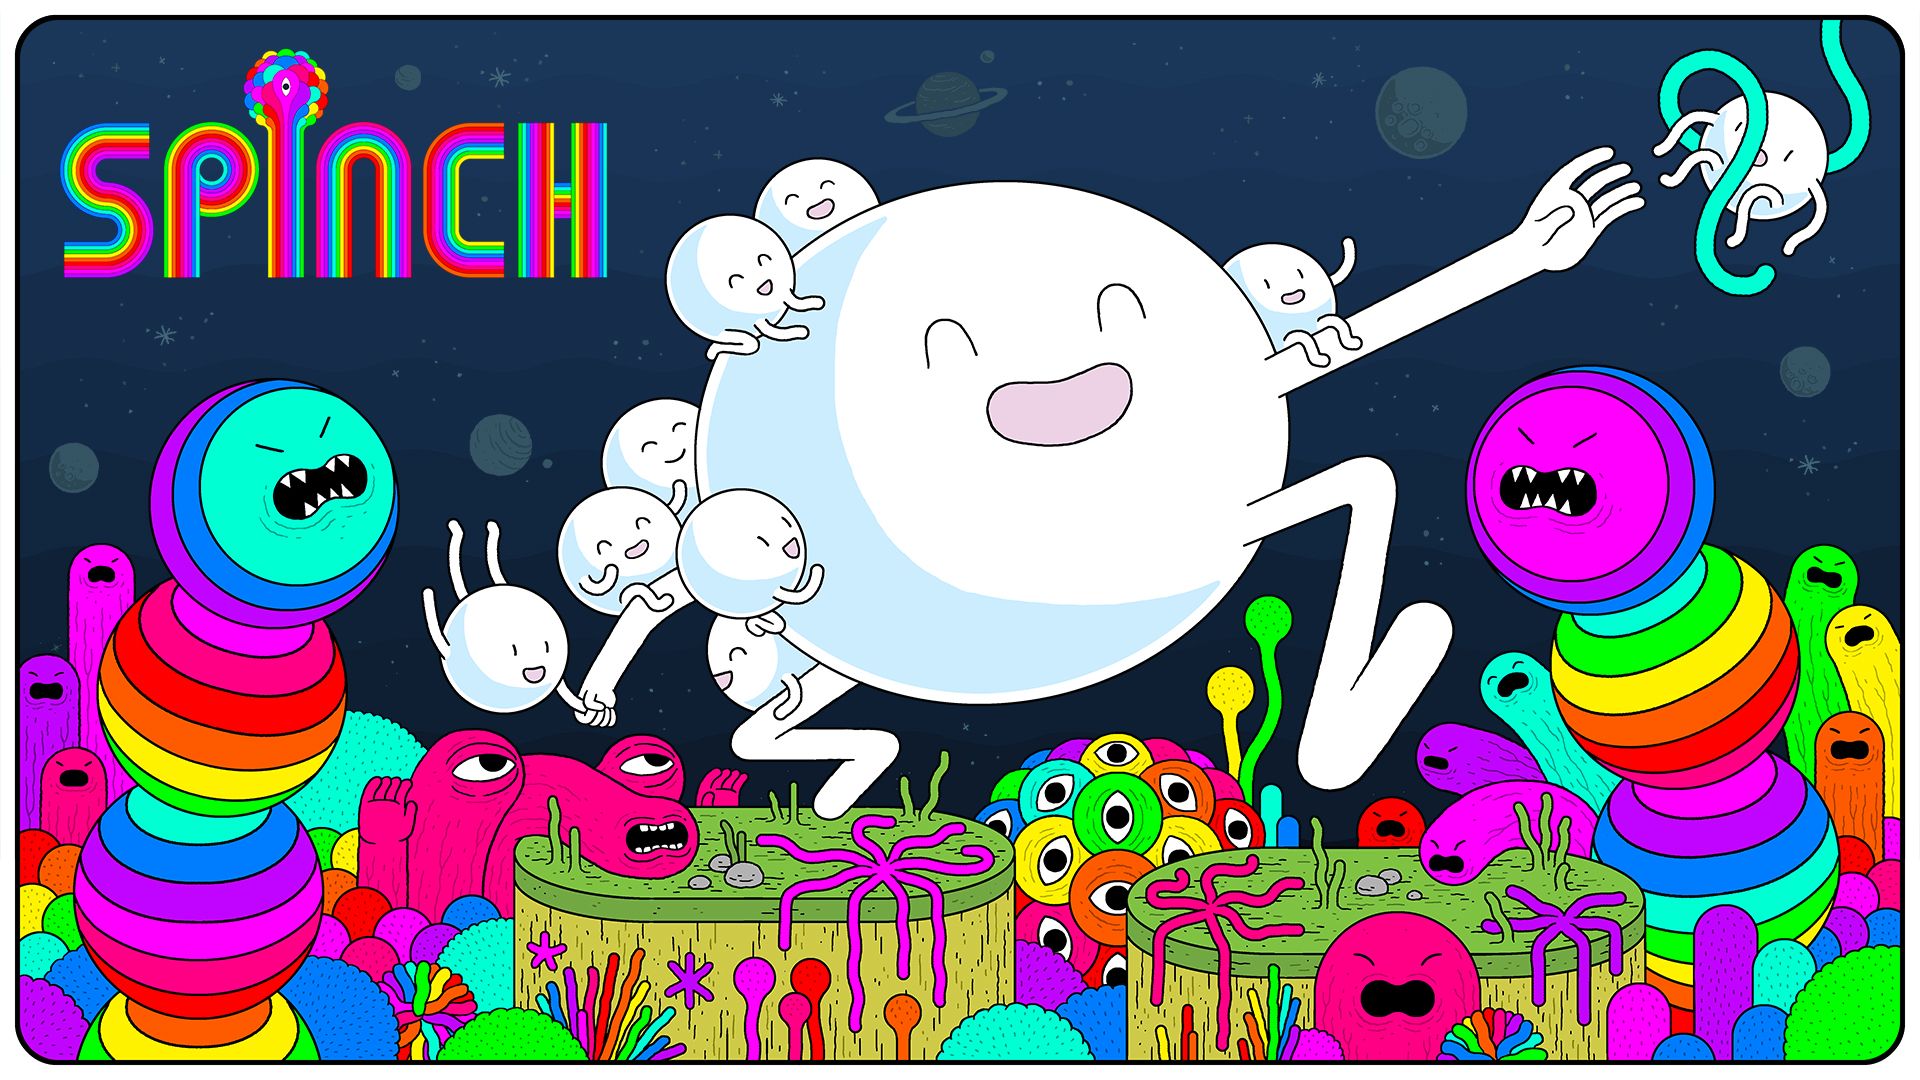 Spinch for Nintendo Switch Game Details